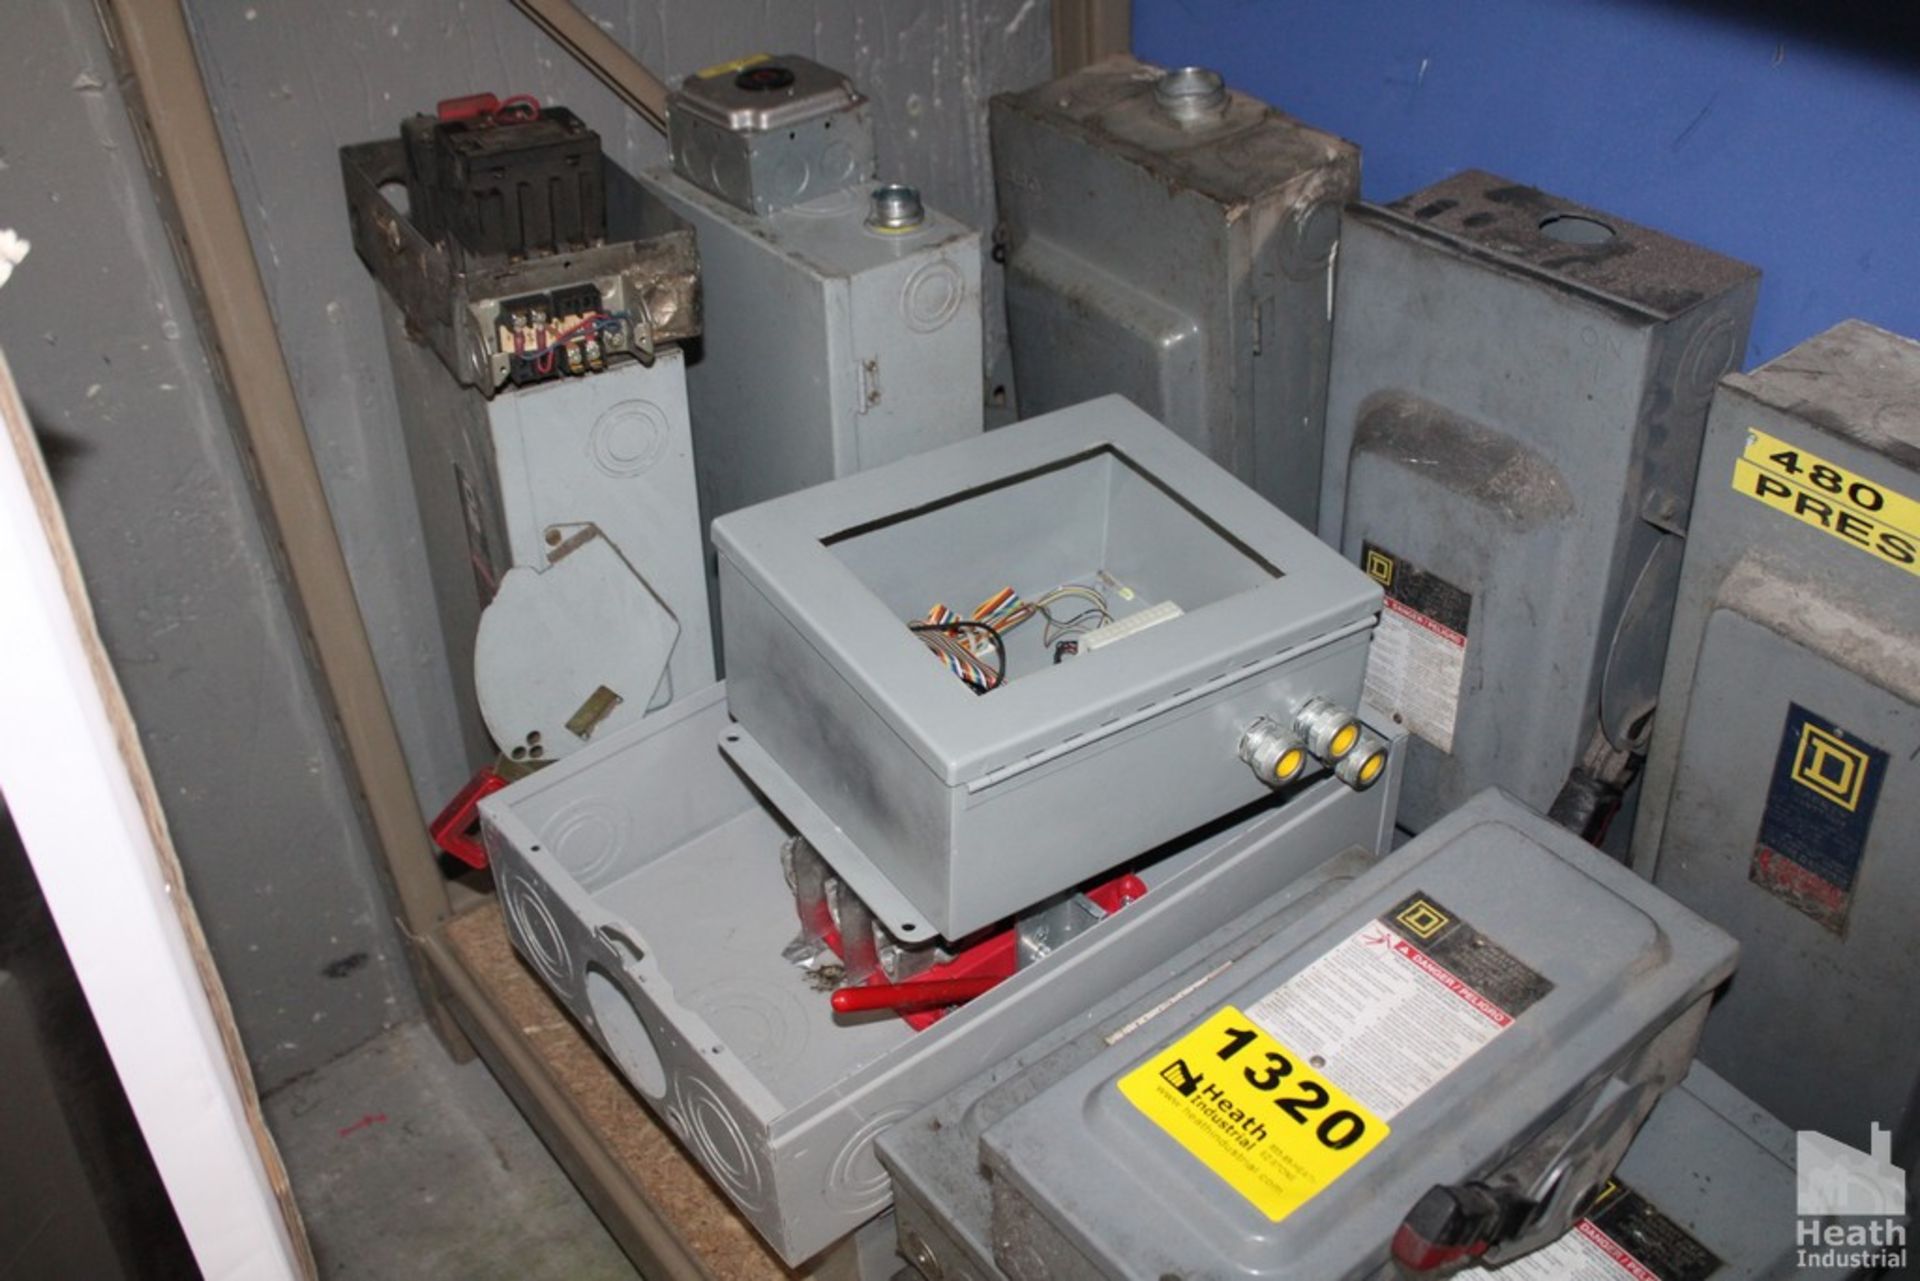 LARGE QUANTITY OF ELECTRIC CIRCUIT BOXES, SAFETY SWITCHES, ETC. - Image 3 of 3